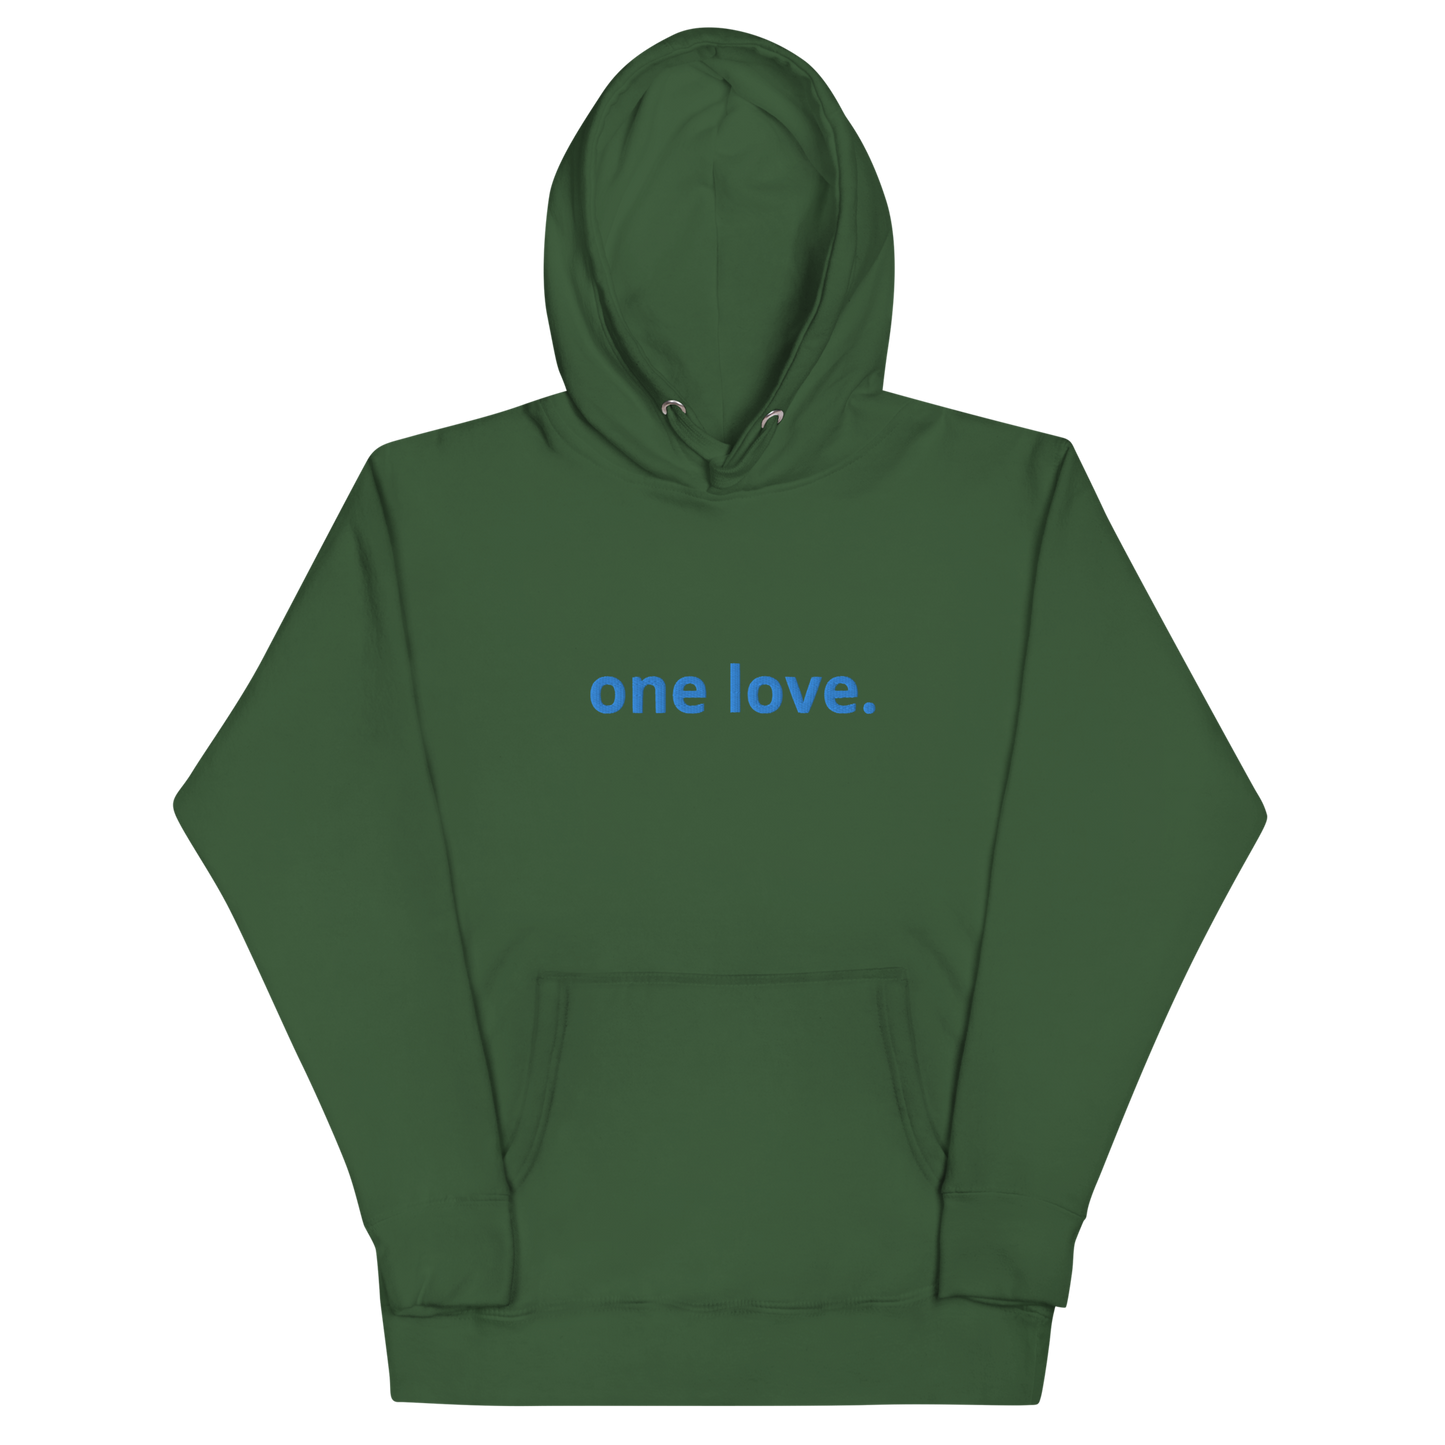 Unisex One Love Embroidered Hoodie